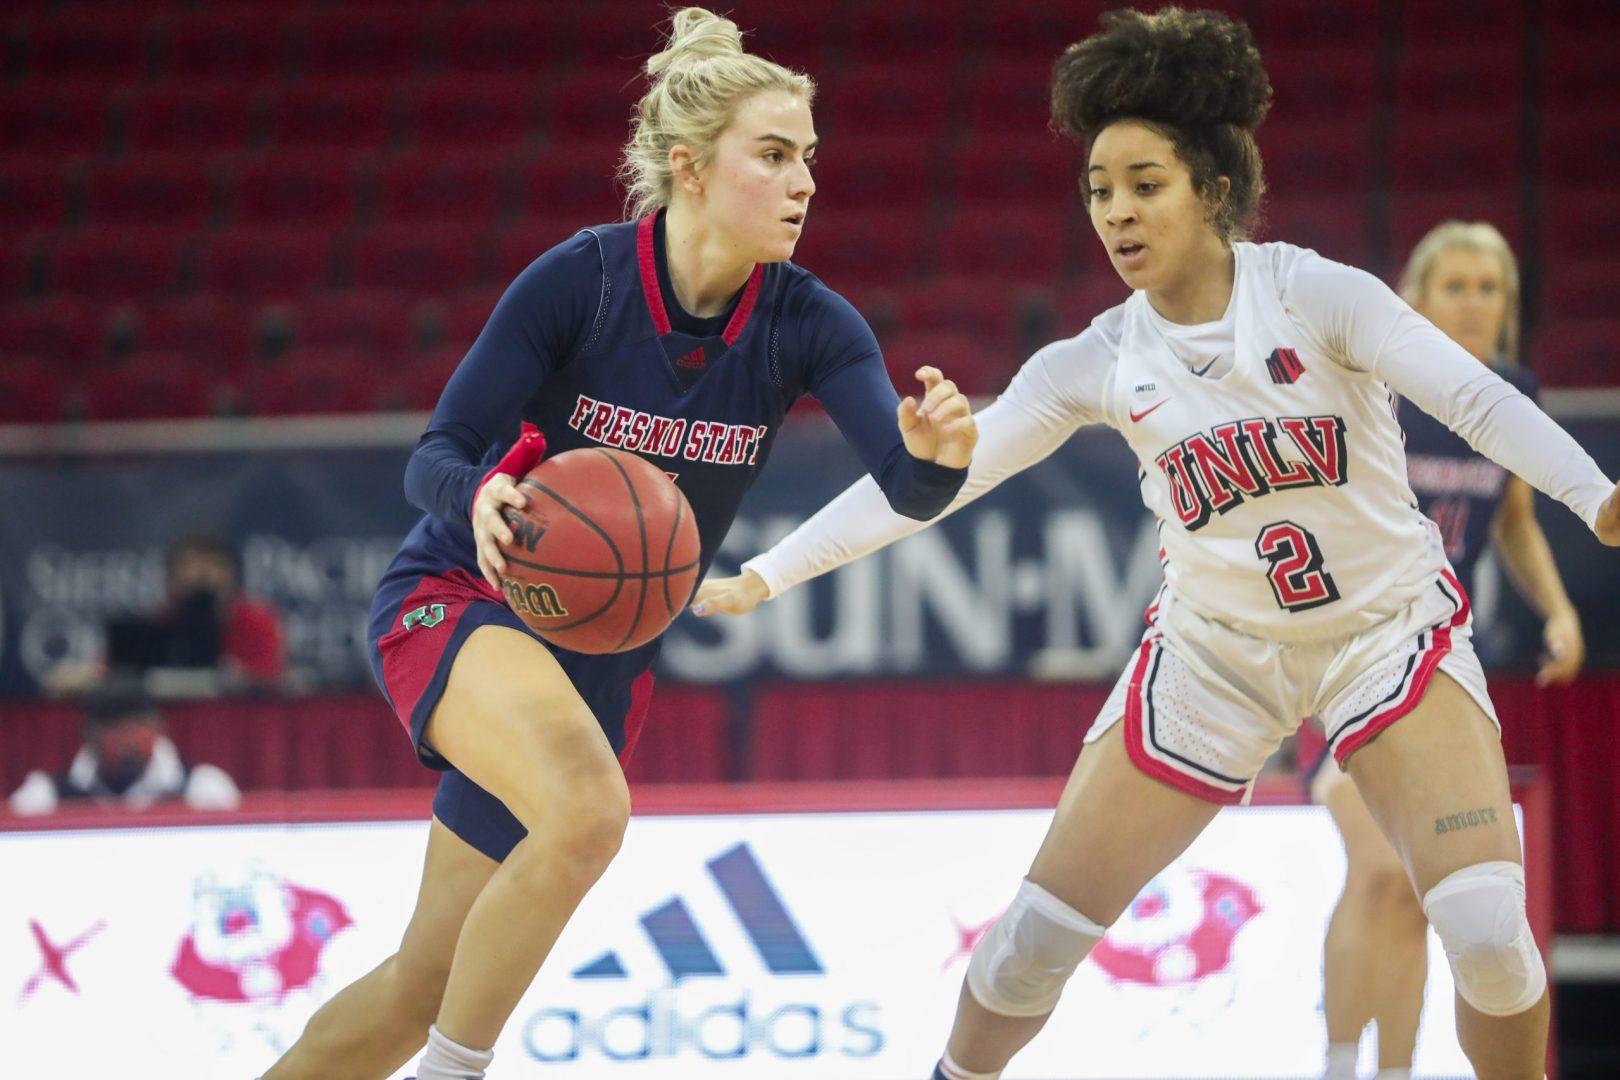 Fresno State guard Haley Cavinder drives in for a layup while being defended by UNLV guard Jasmine Singleton at the Save Mart Center on Saturday, Feb. 27, 2020. (Vendila Yang/The Collegian)